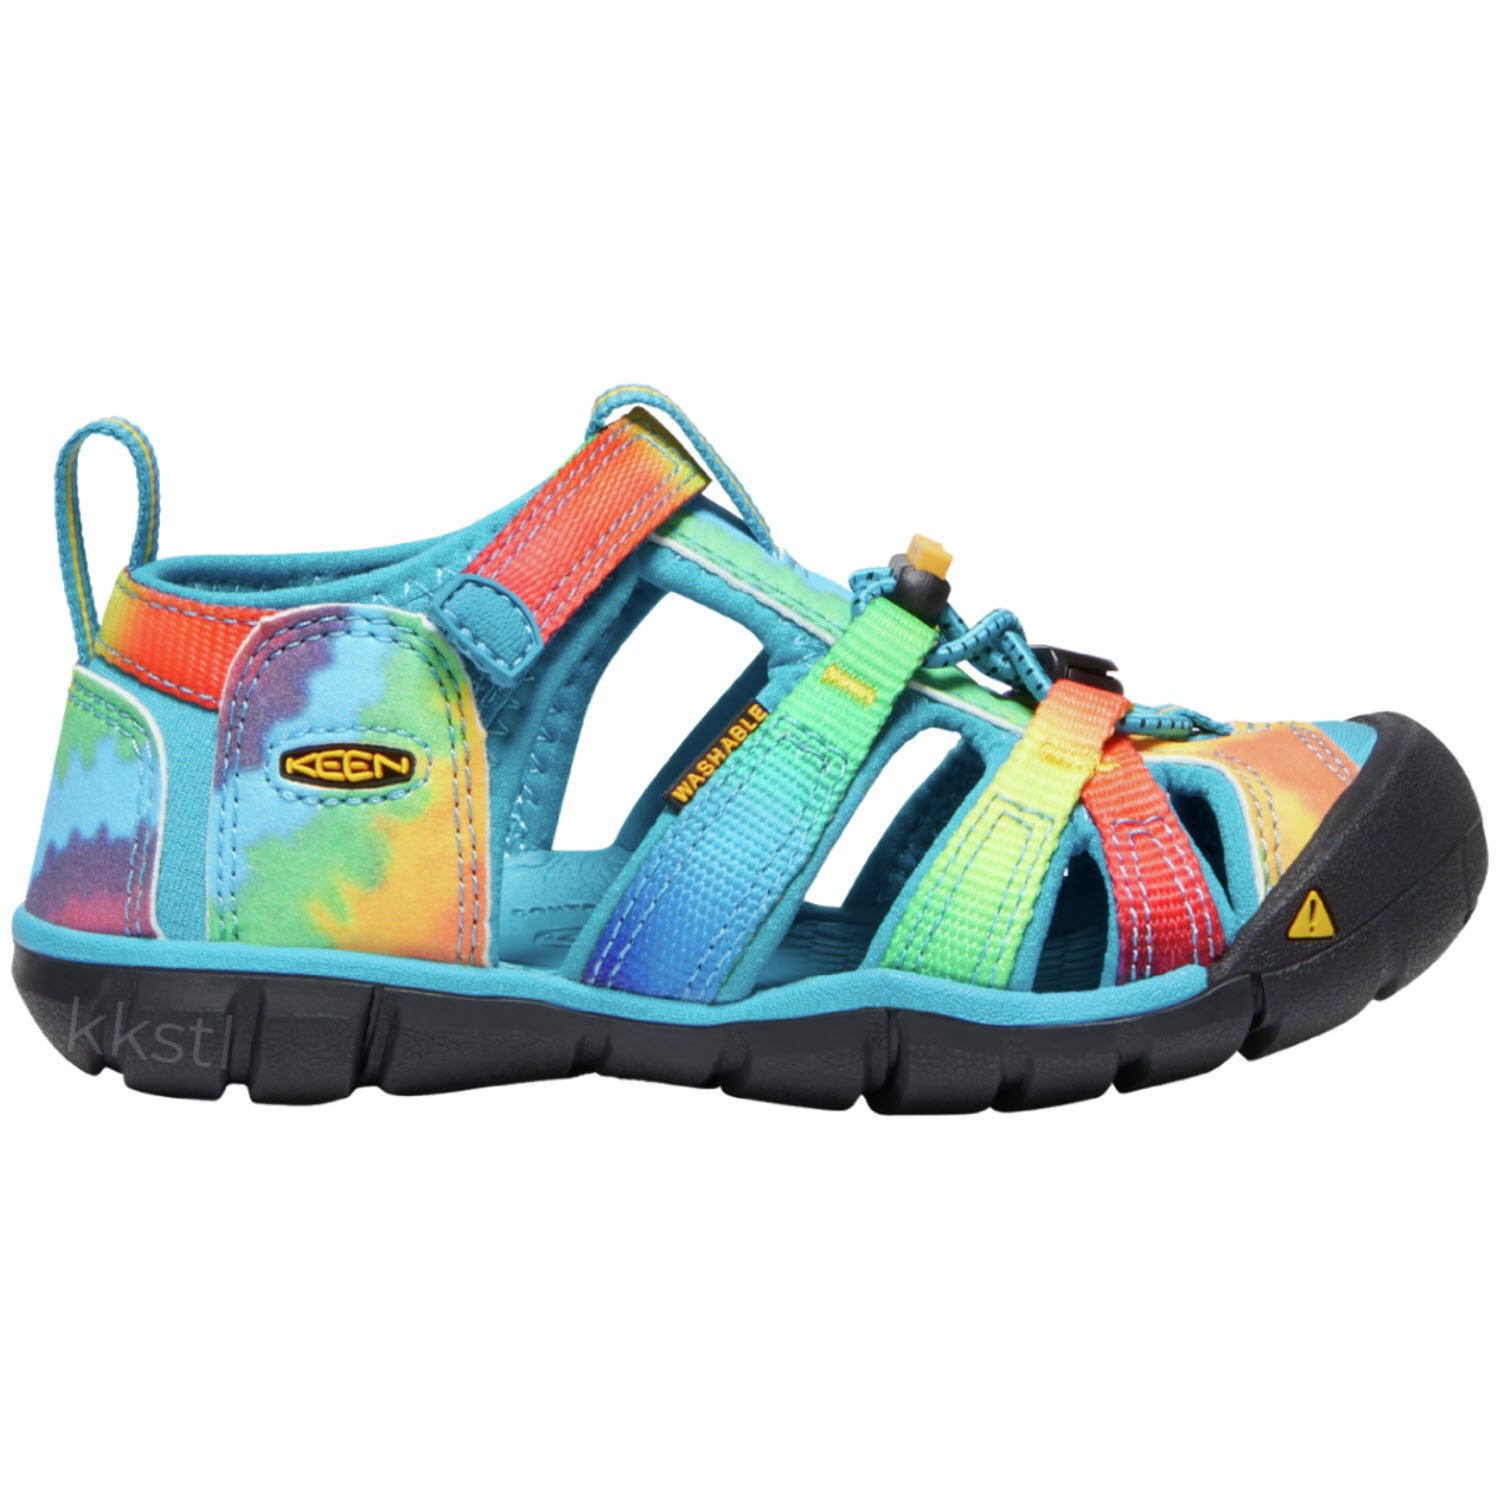 Colorful Keen children's closed-toe hybrid water sandal with Velcro strap, featuring the Secure Fit Lace Capture System.